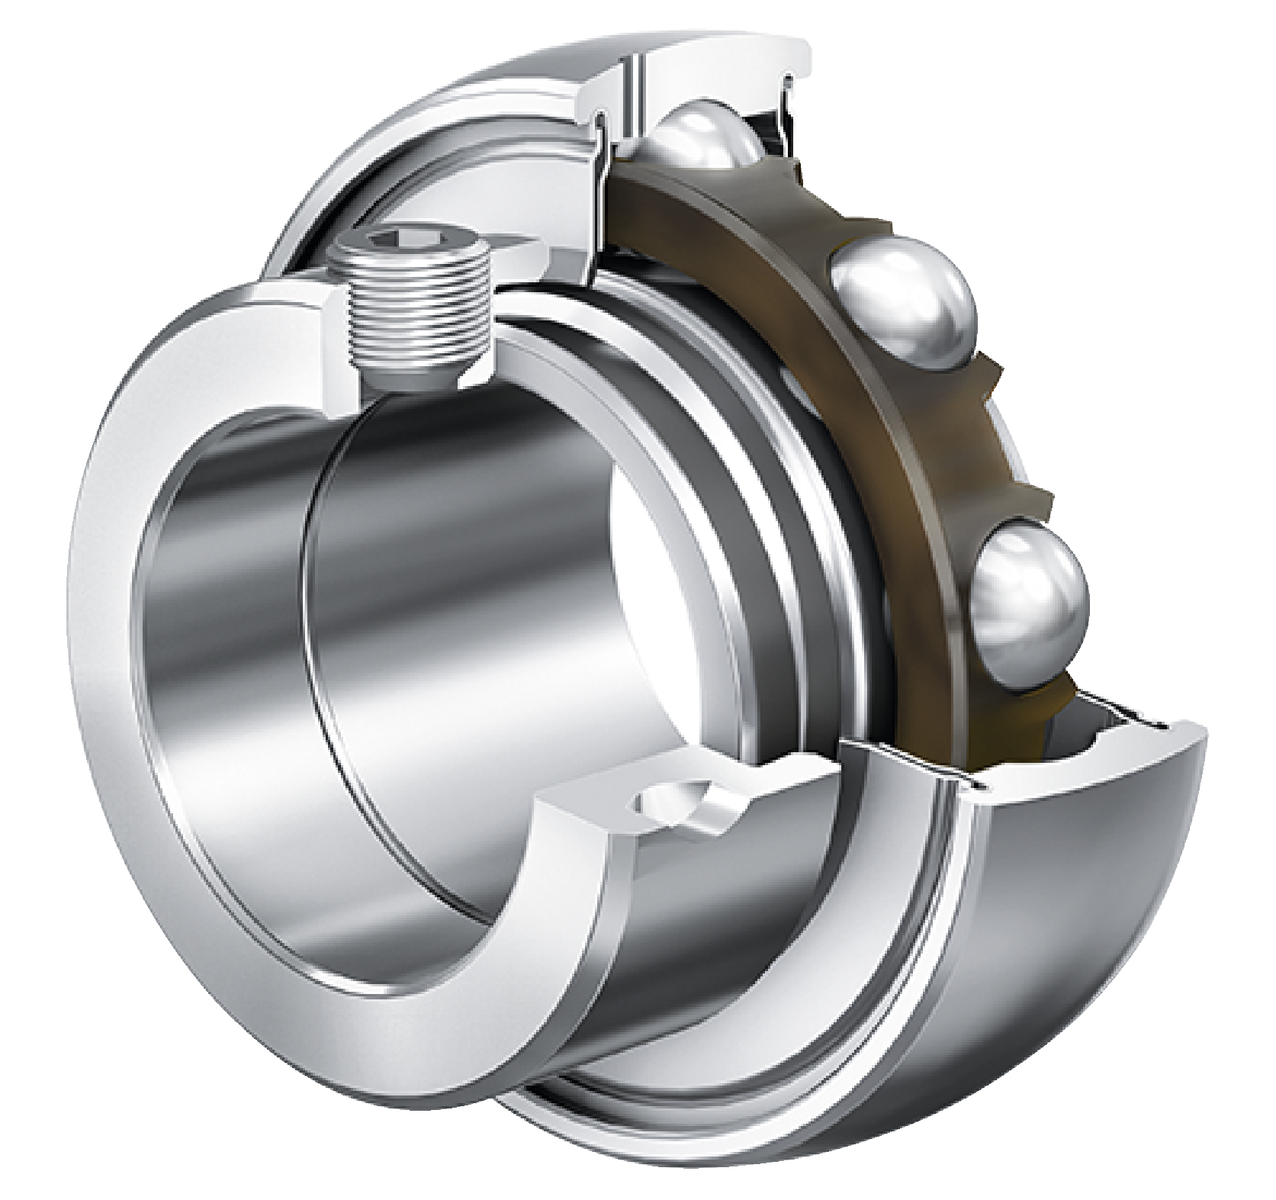 Radial Insert Ball Bearing GRAE..-NPP-B-FA107/125.5, Spherical Outer Ring, Eccentric Locking Collar, P Seals on Both Sides, Anti-Corrosion Protection